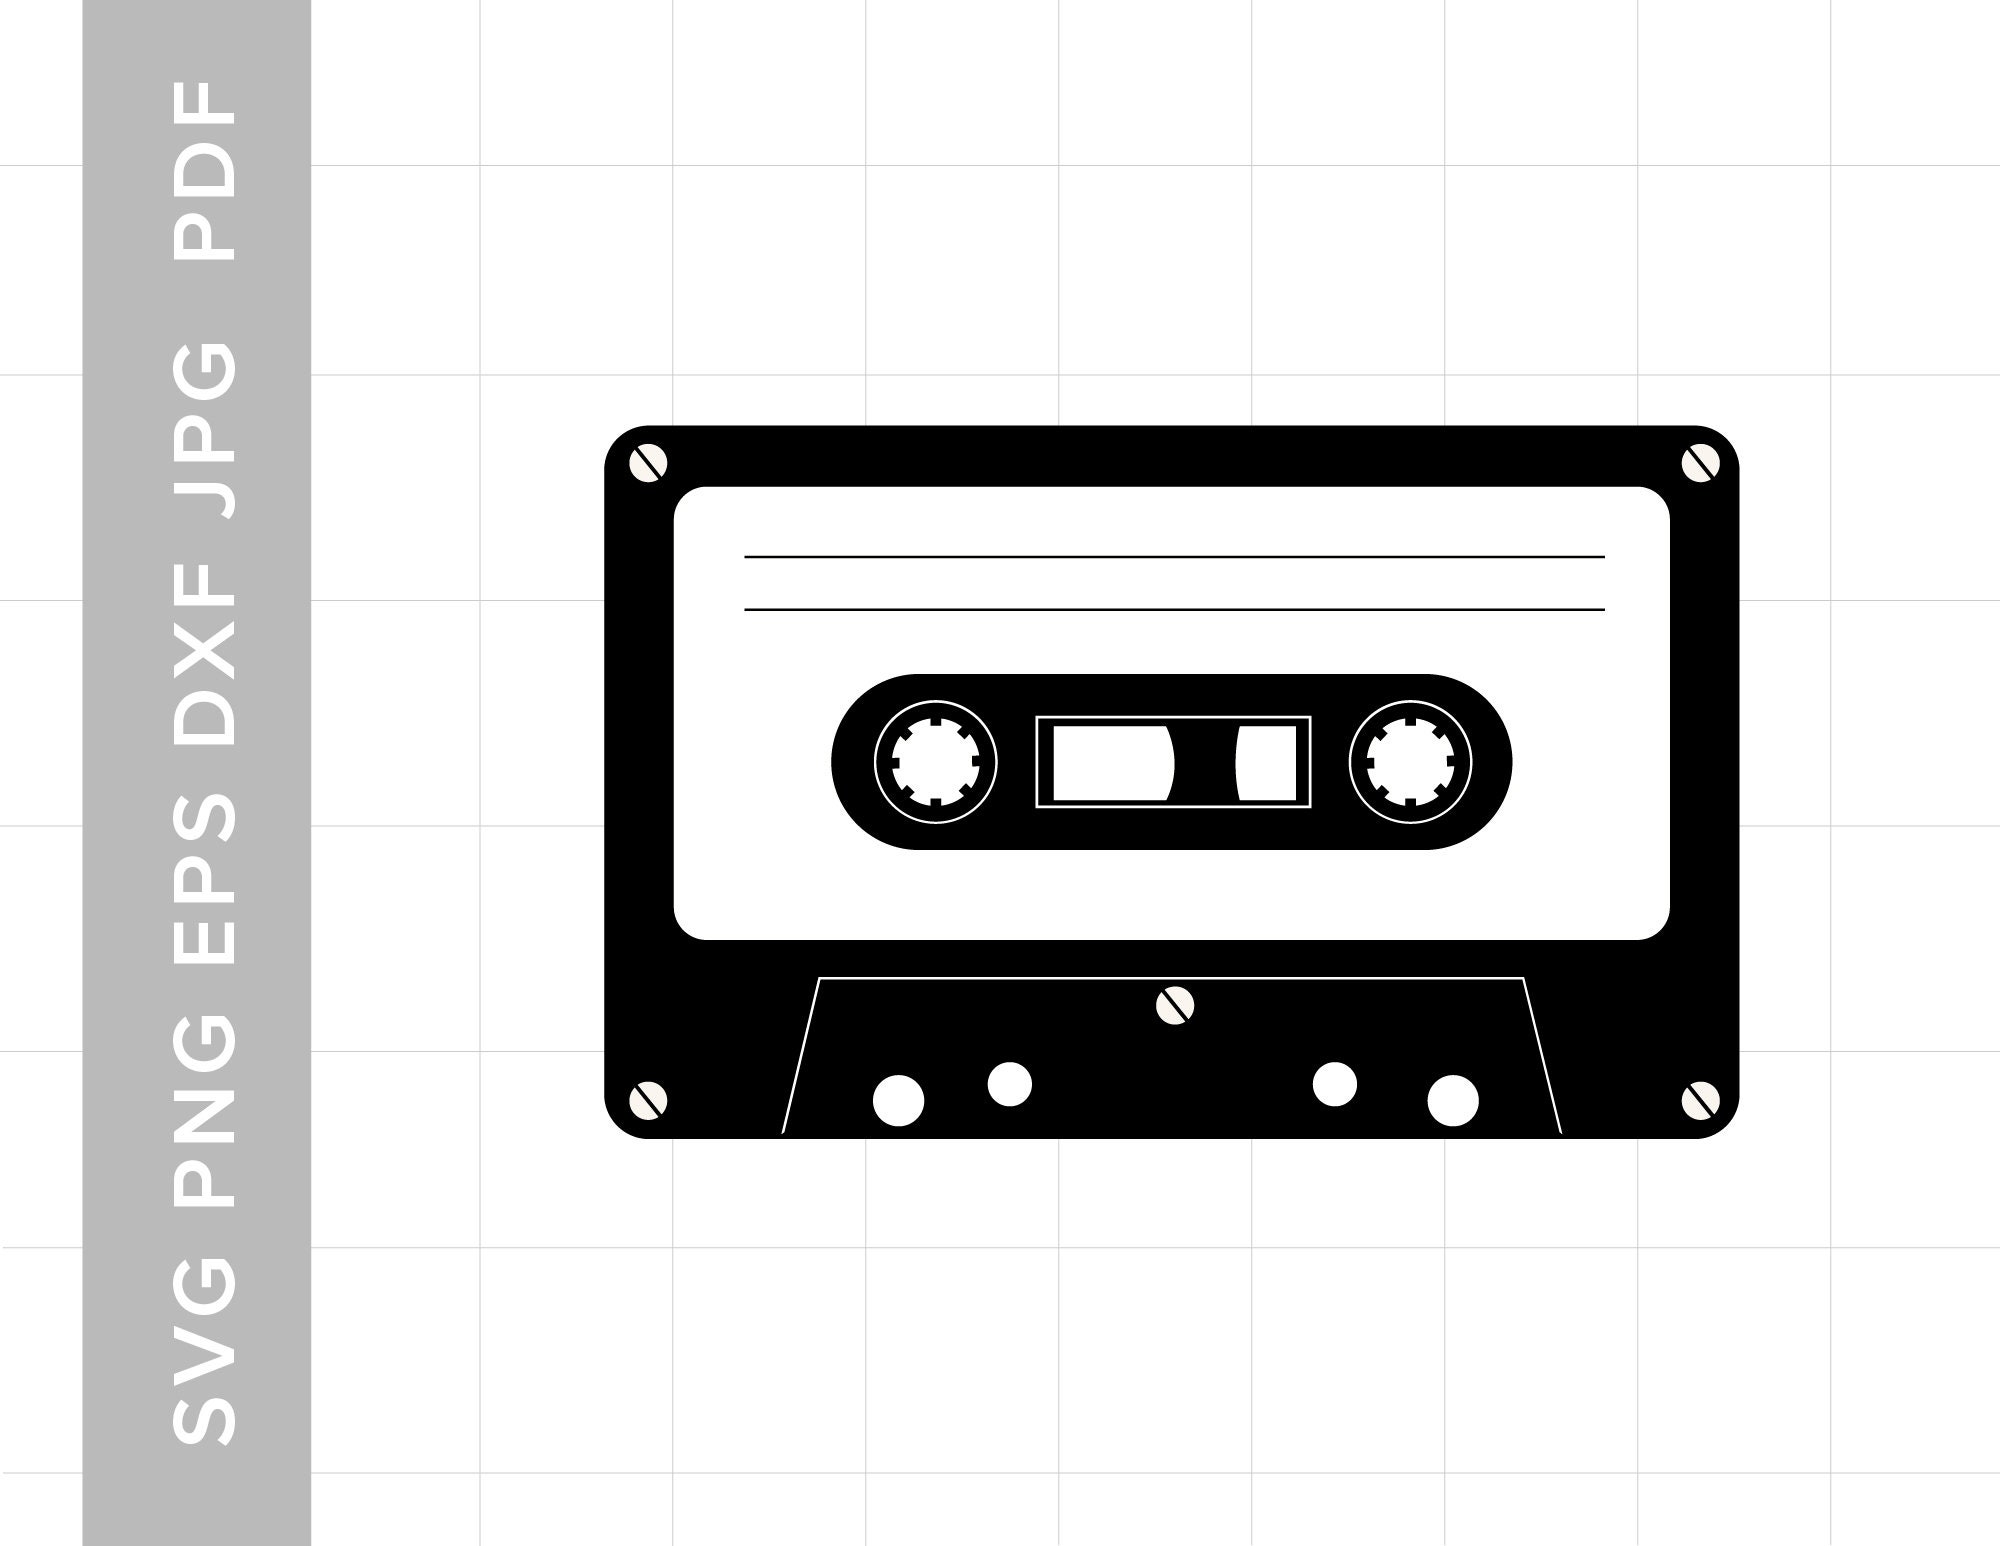 Vector old compact audio cassette with tangled tape Stock Vector